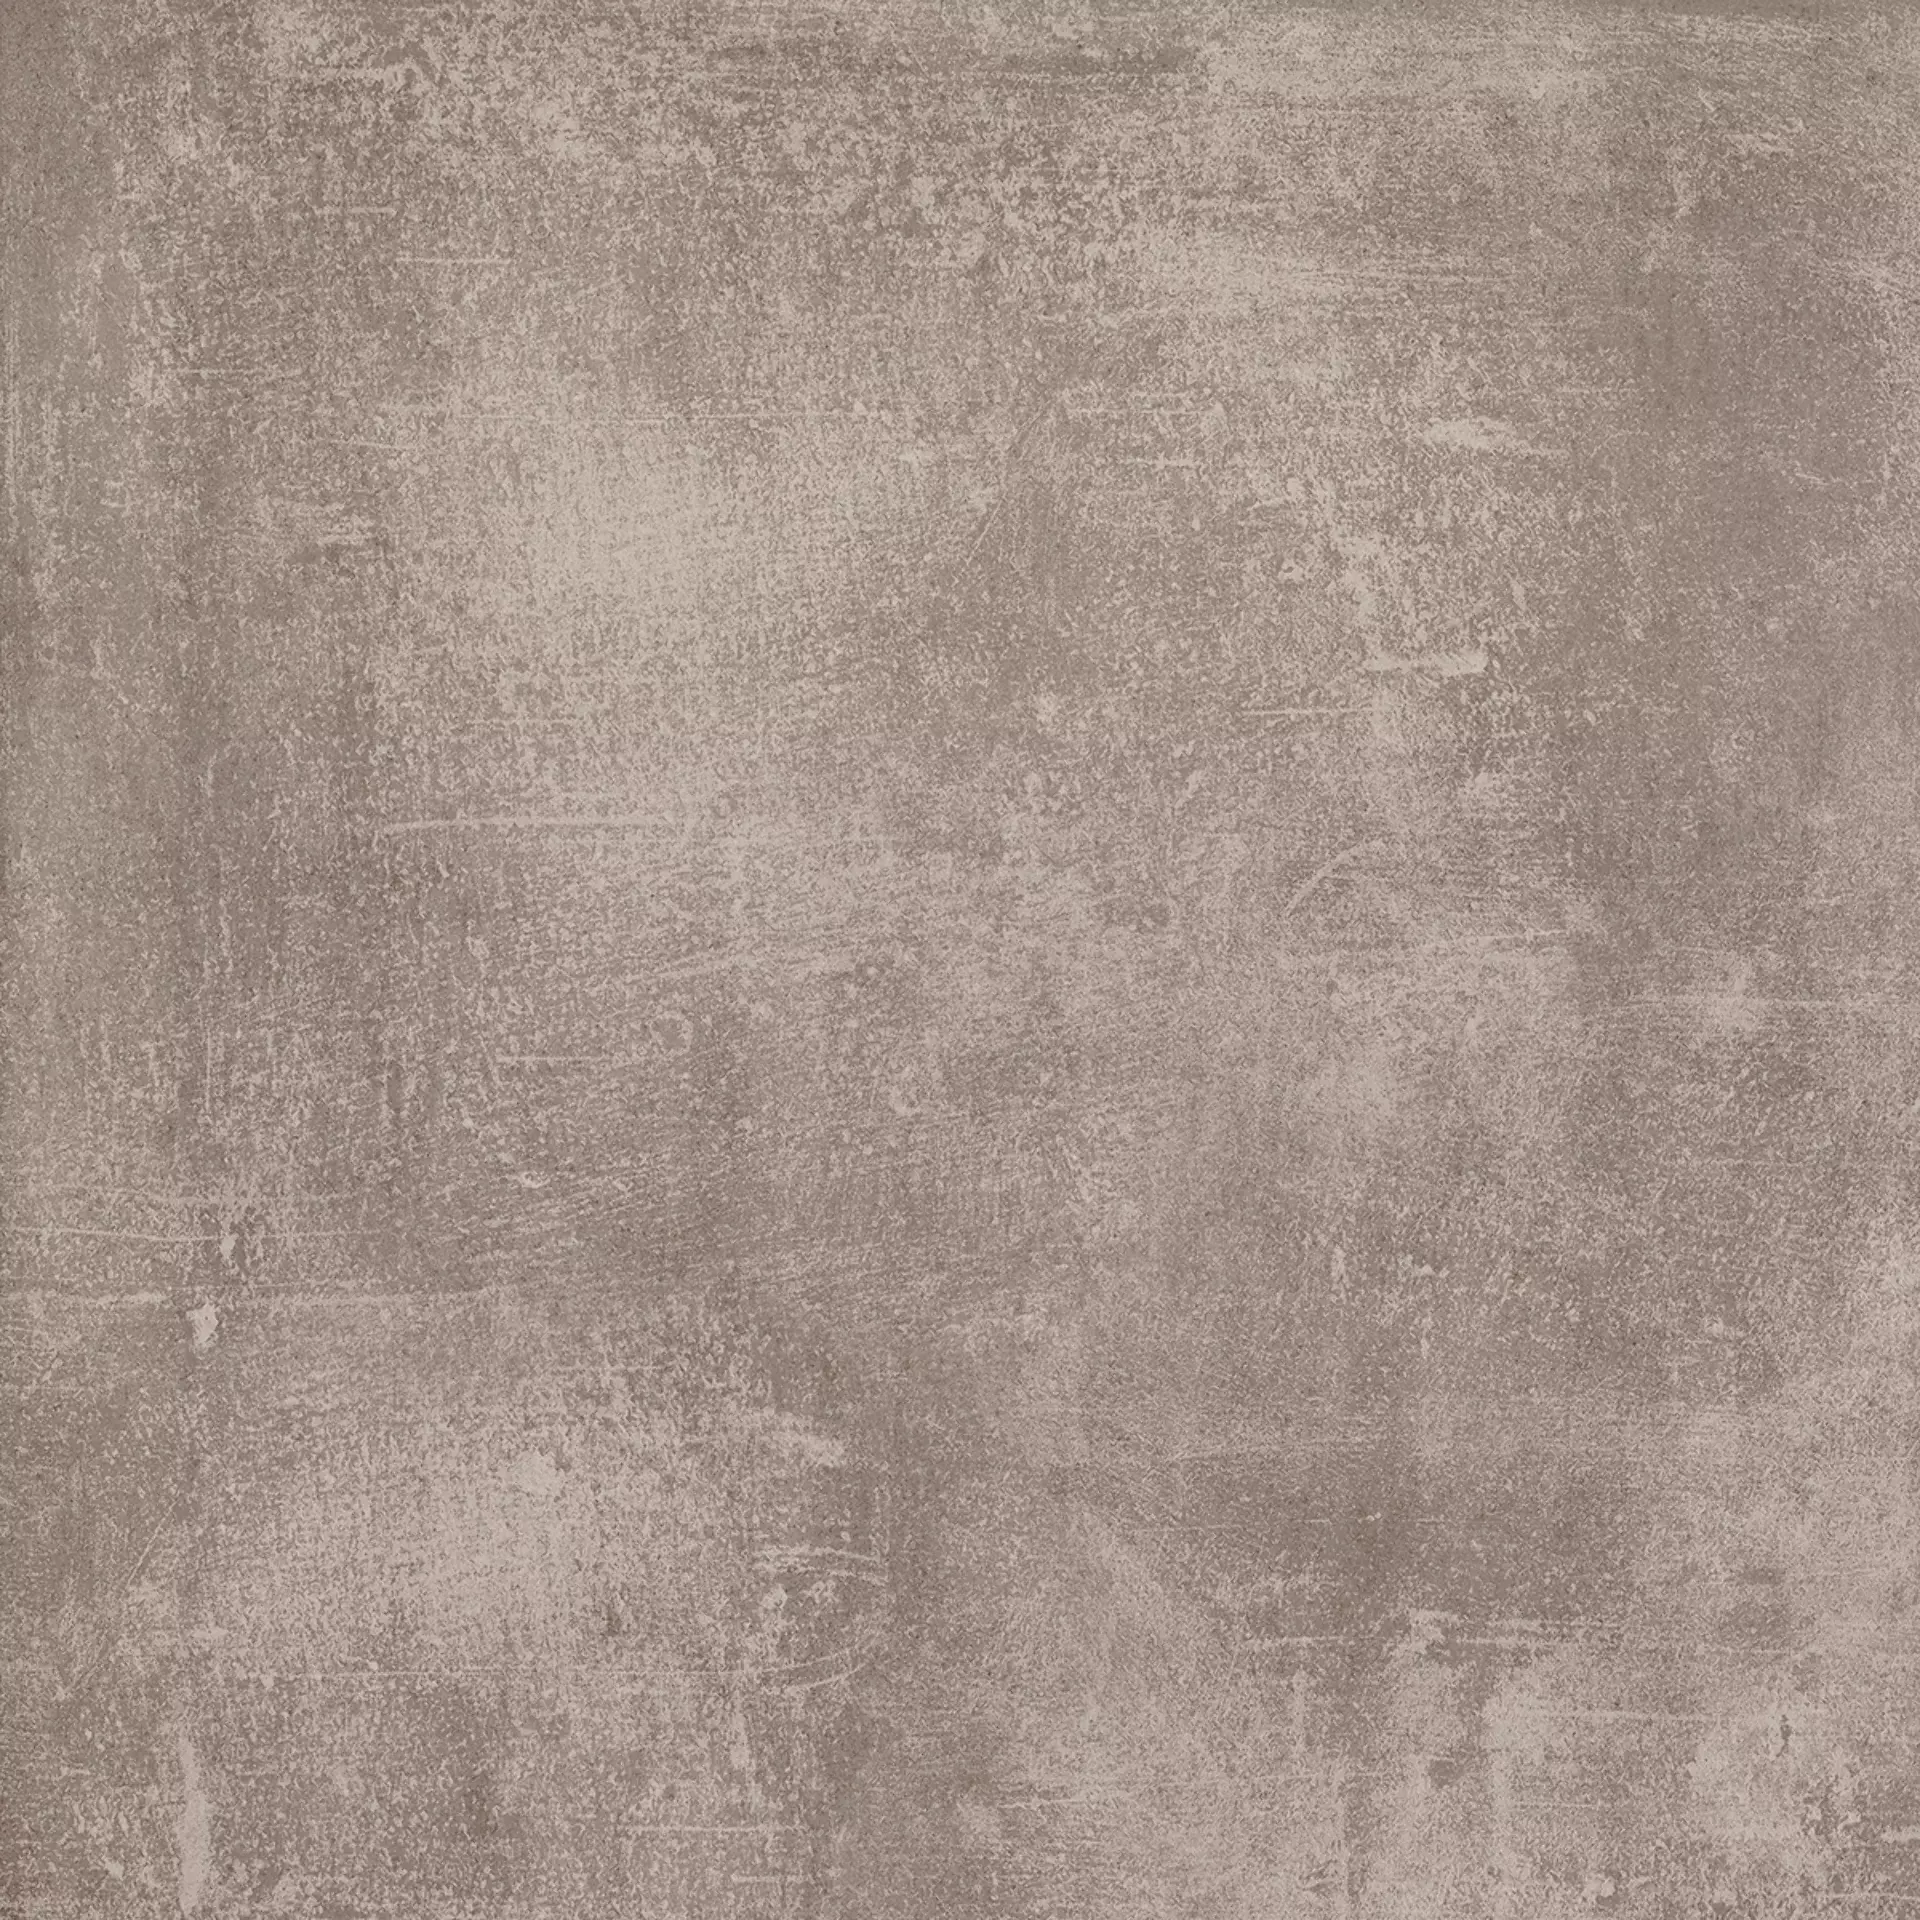 Rondine Volcano Taupe Grip J87499 60x60cm rectified 20mm